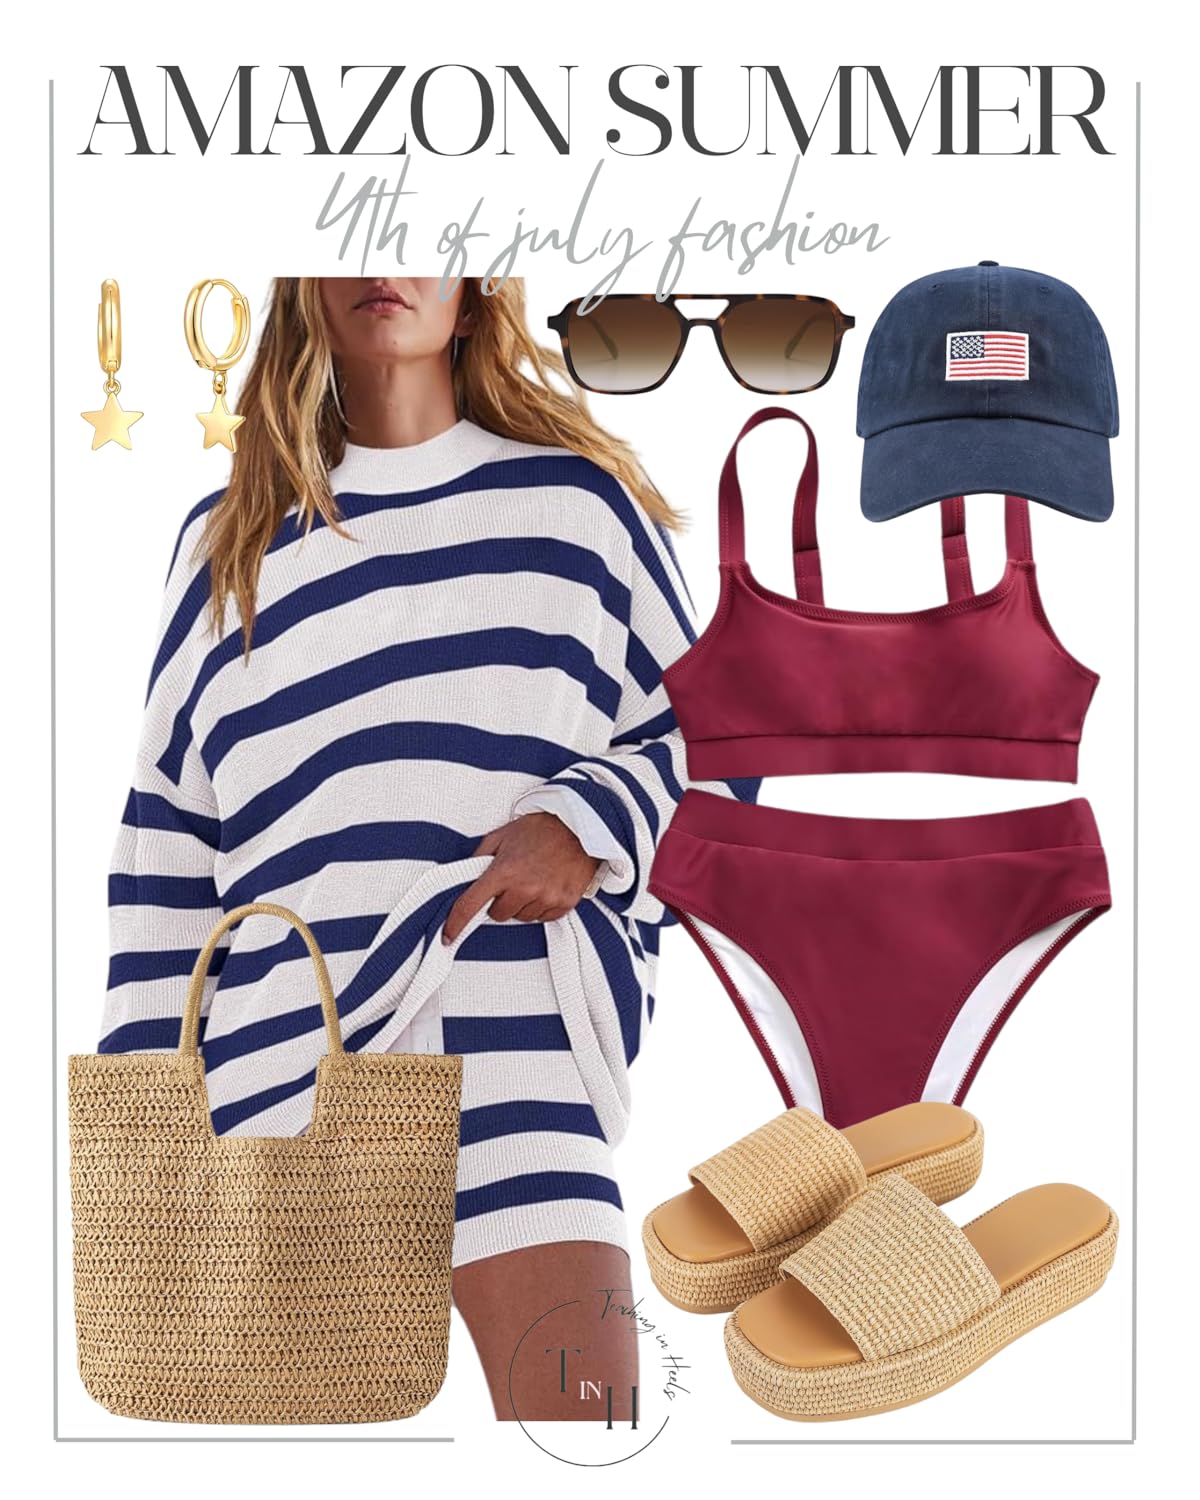 4th of July Style Guide: Must-Have Outfits & Essentials

fourth of july, summer, summer outfit, summer fashion, outdoor hosting, summer style, striped matching set, sandals, swimwear, Amazon